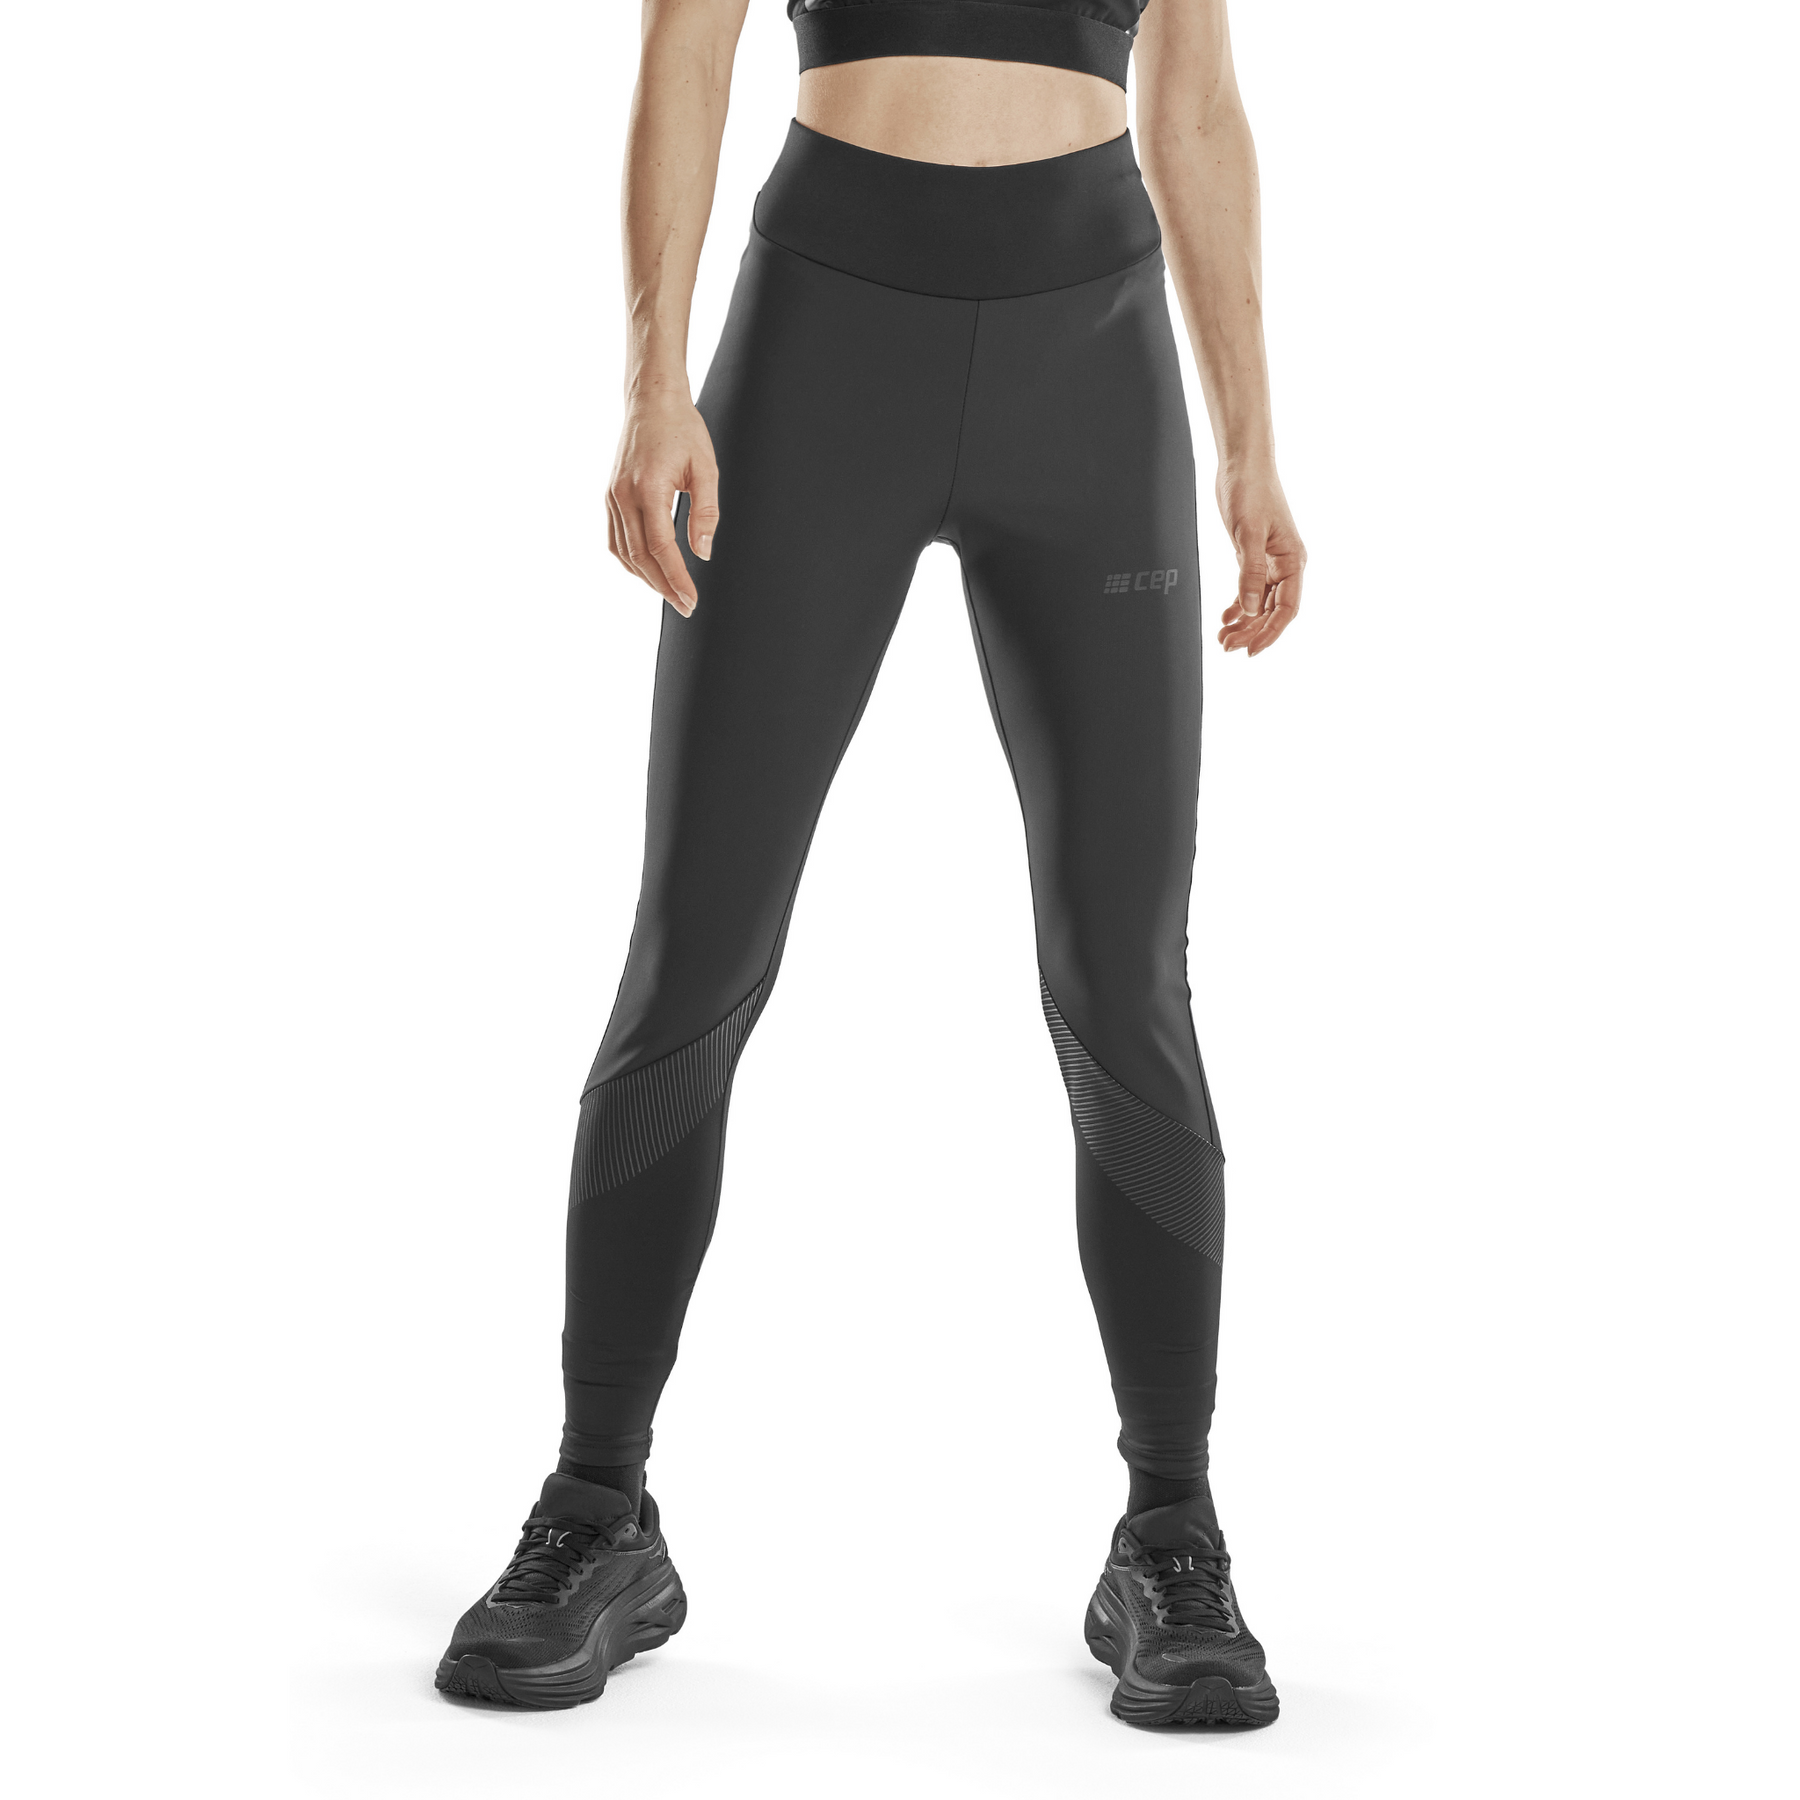 NWT DSG Women's Cold Weather Compression Tights Activewear XS Black $40  F233 